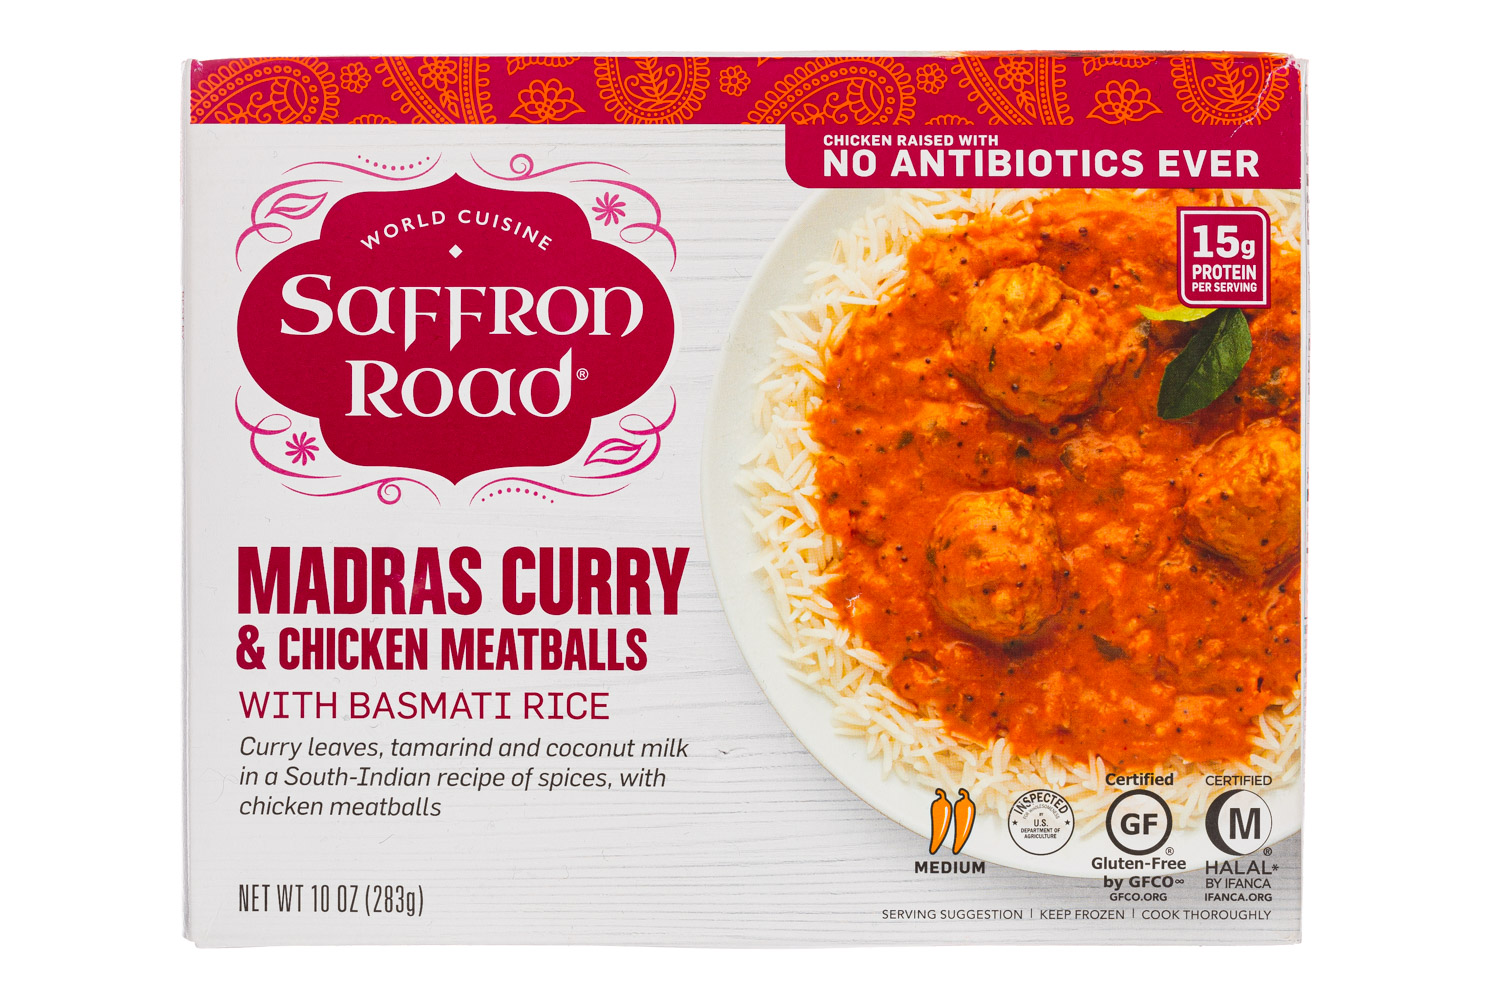 Madras Curry & Chicken Meatballs with Basmati Rice